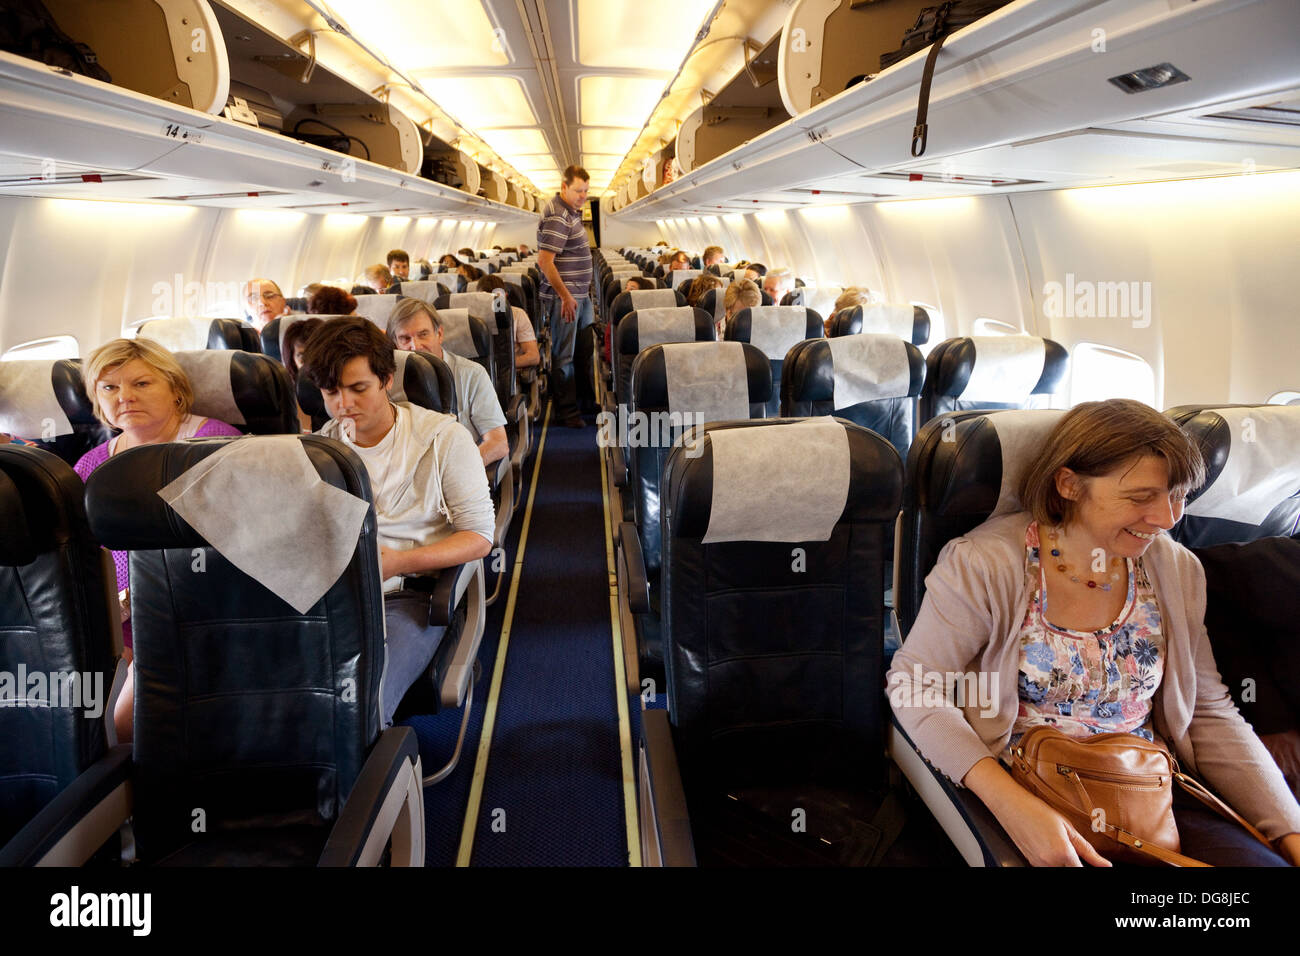 Passengers sitting in the cabin of a British Airways BA Boeing 737 plane, Johannesburg airport, South Africa Stock Photo